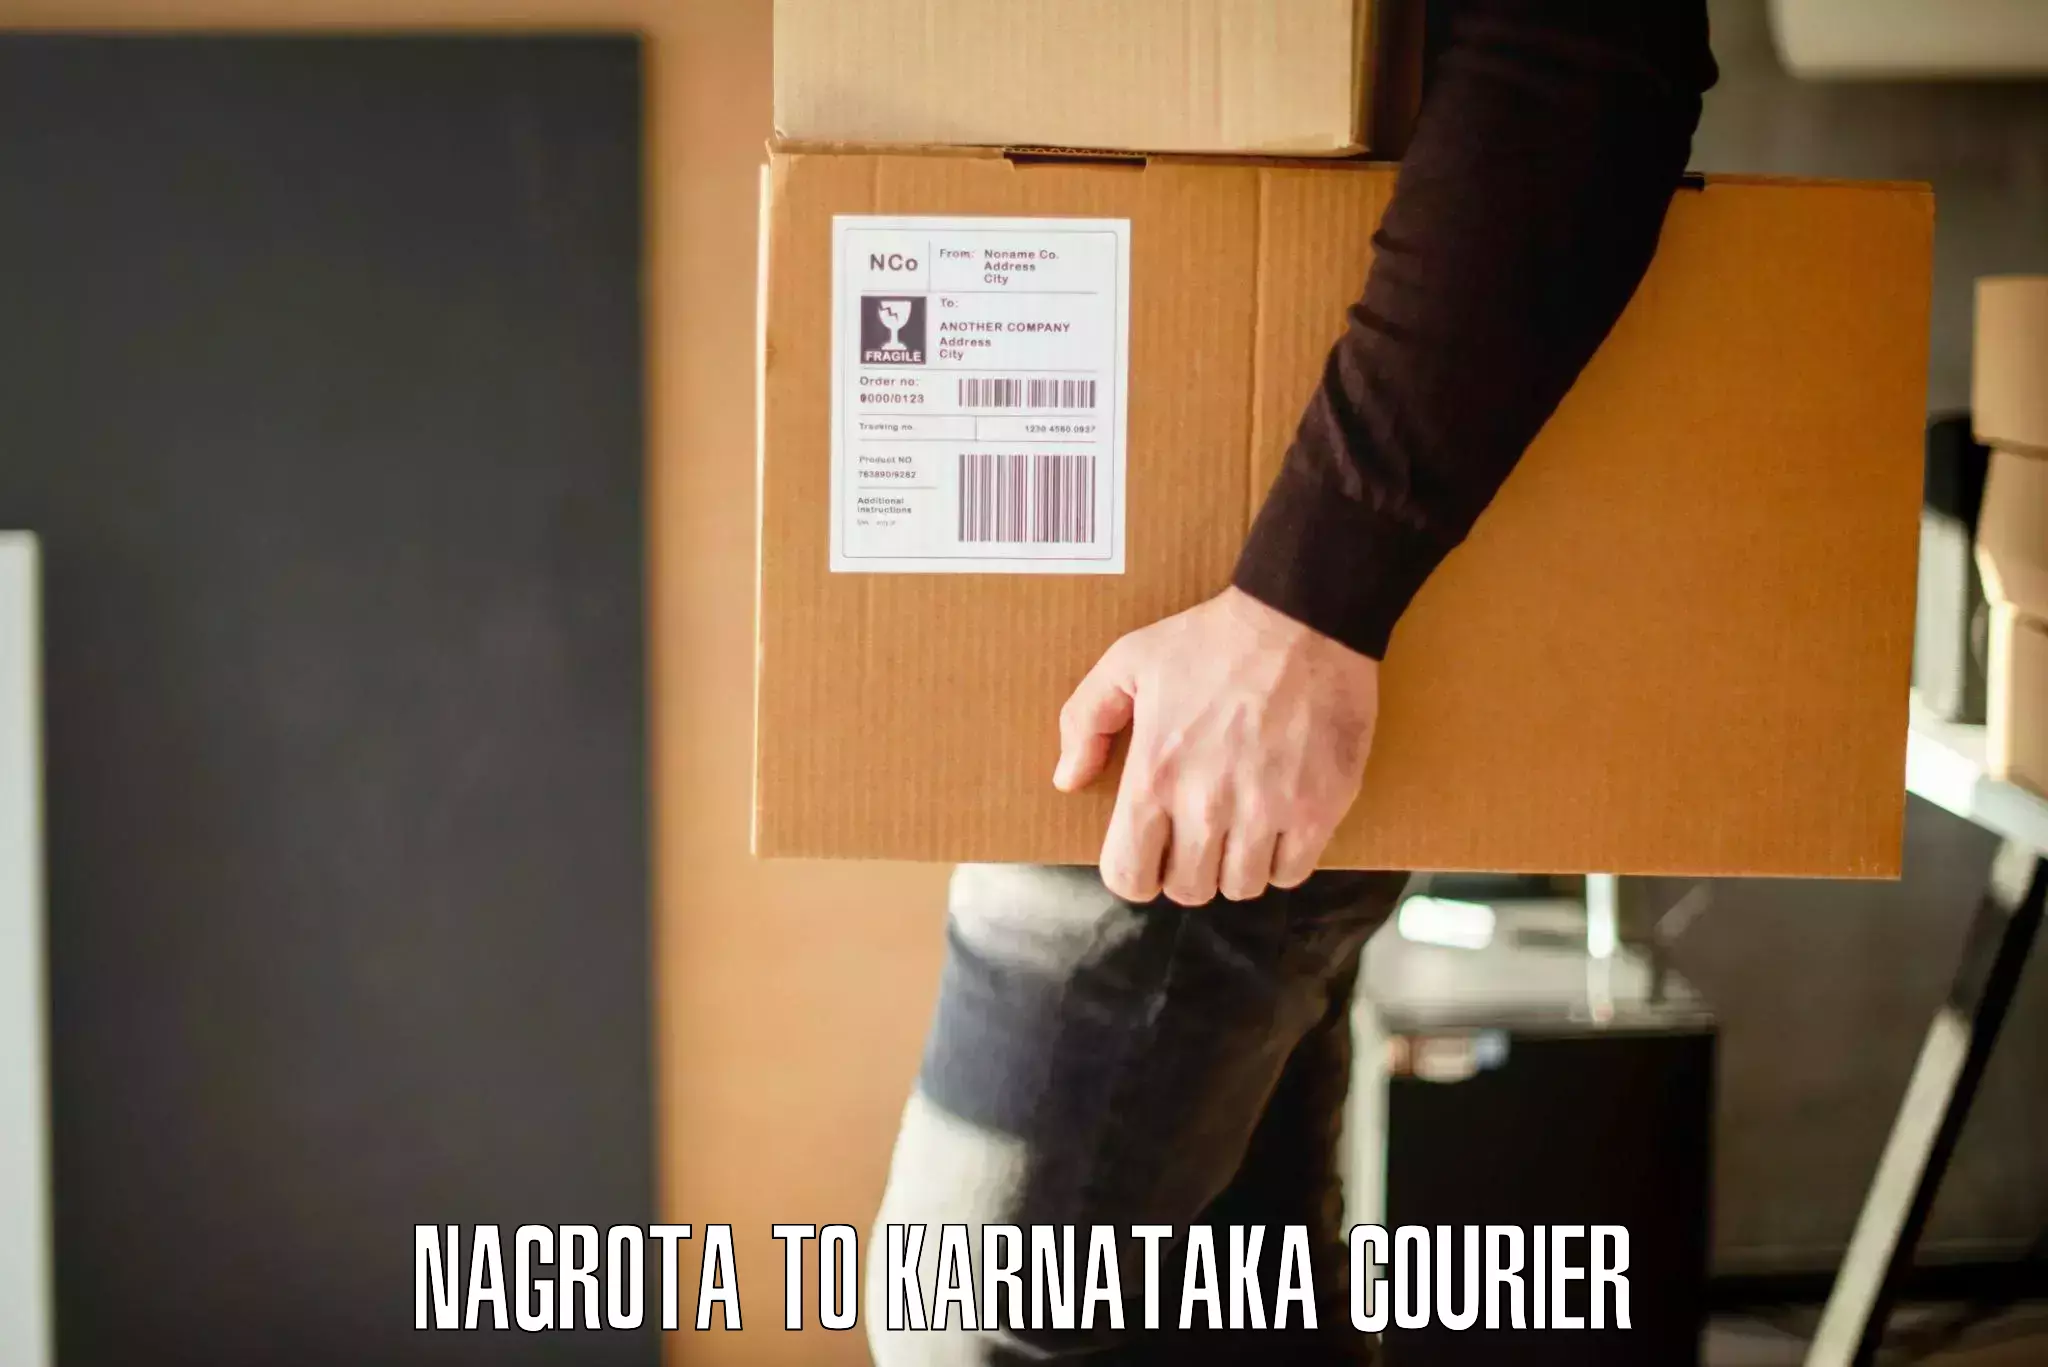 Furniture delivery service Nagrota to Mangalore Port